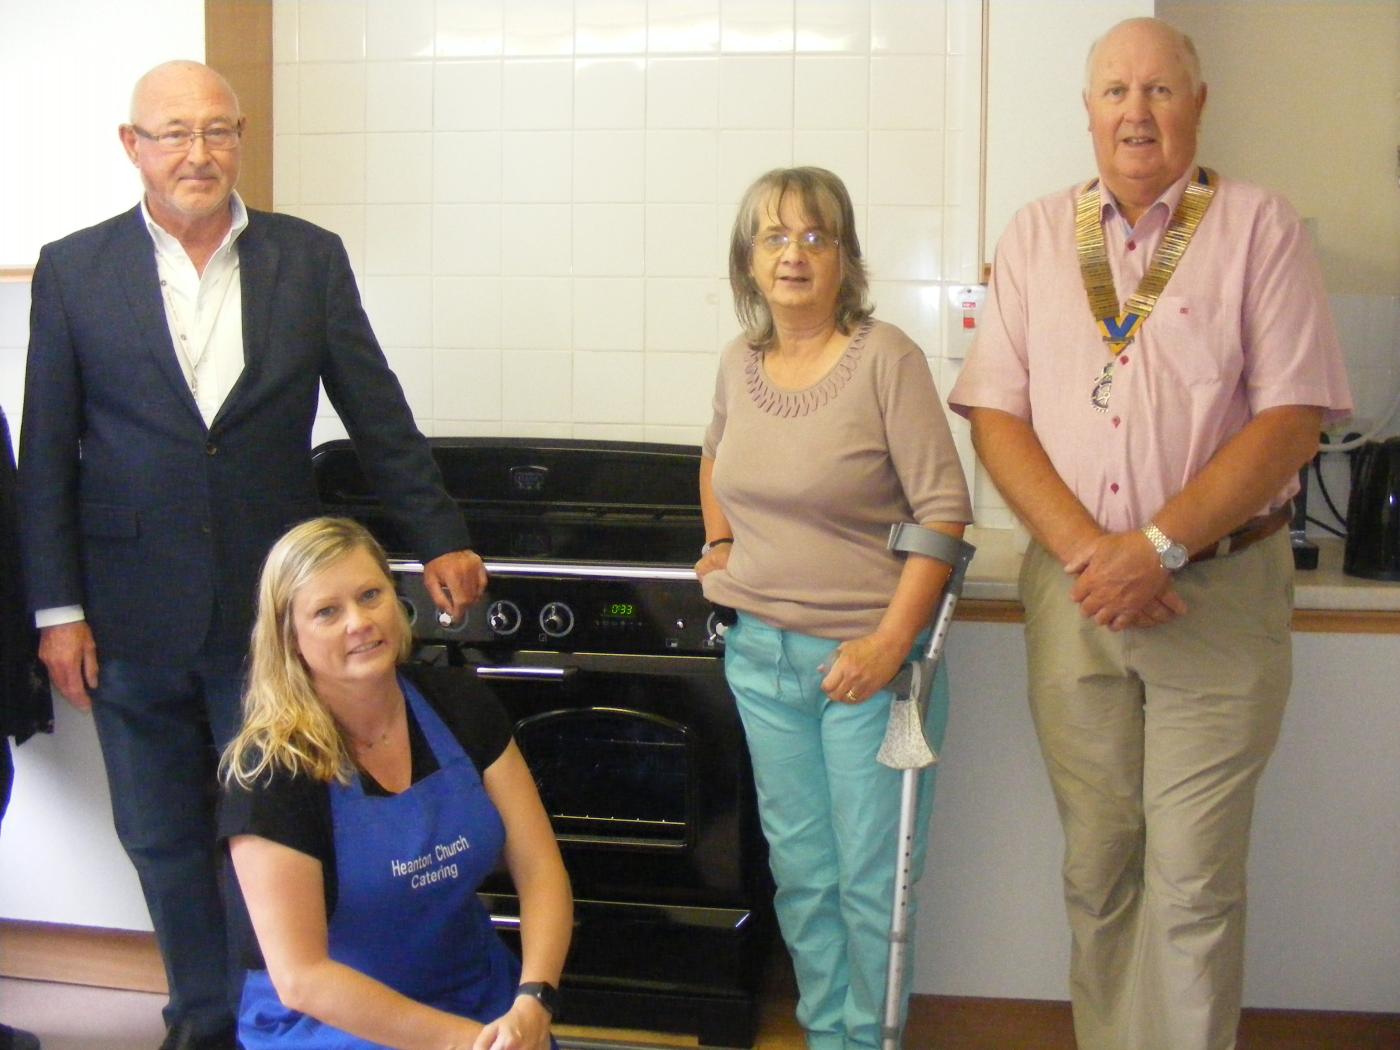 Ross Moon with Christine Westlake  Heanton Lunch Club and their new Rangemaster cooker